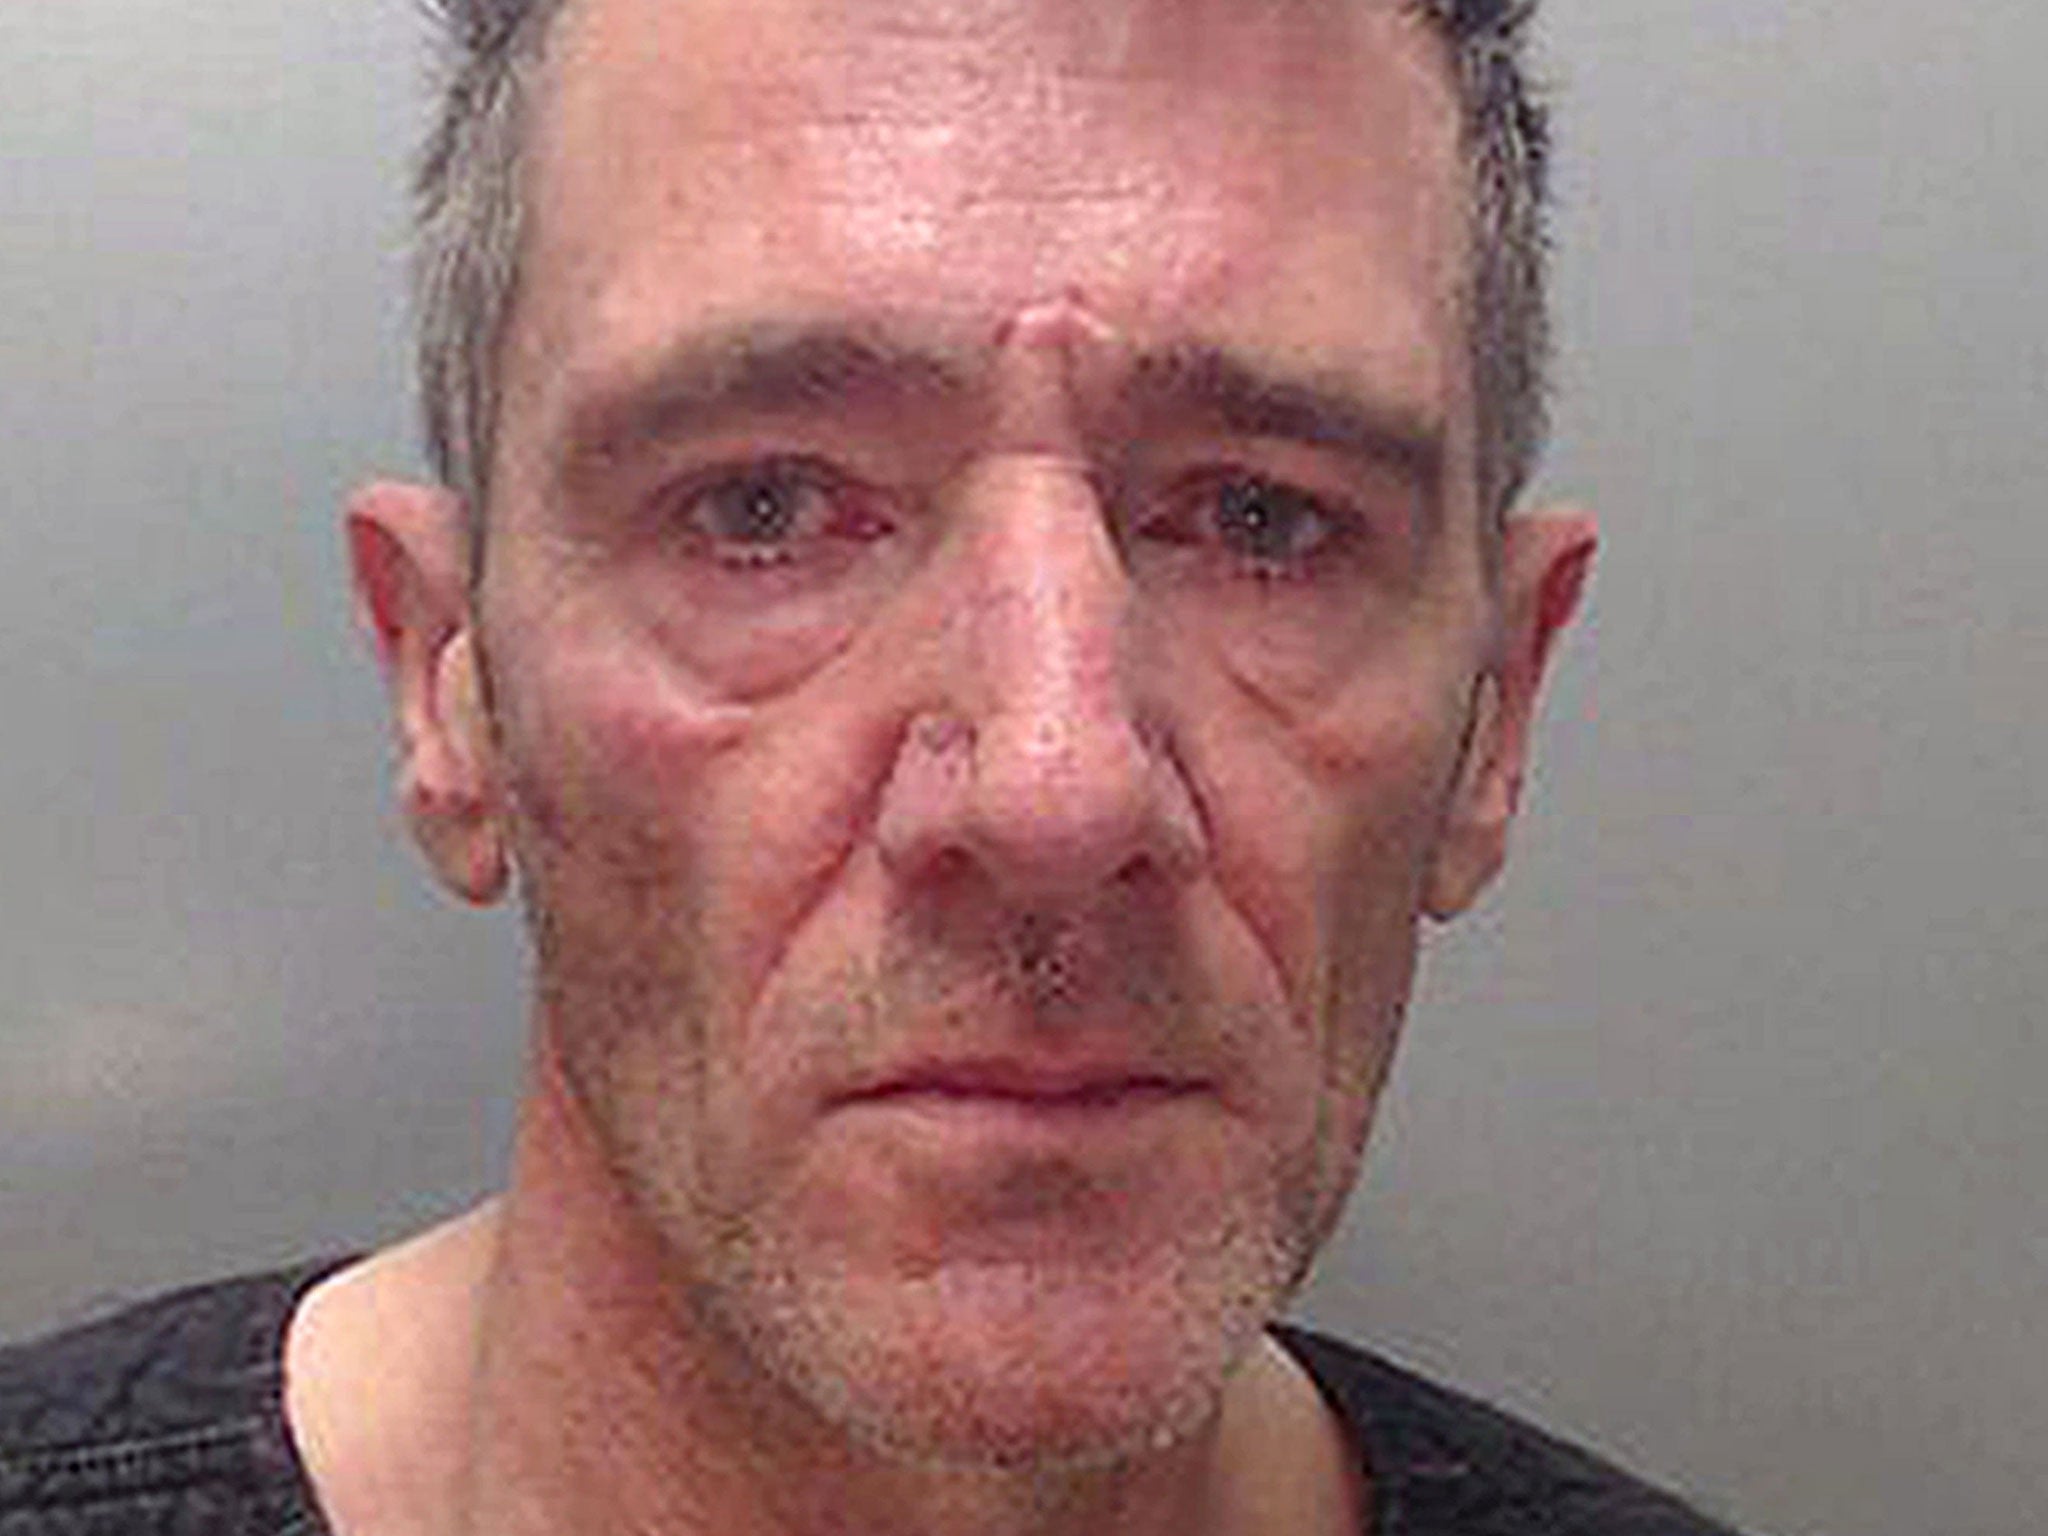 Paul Ripley, who was jailed for kidnapping and raping an 11-year-old girl